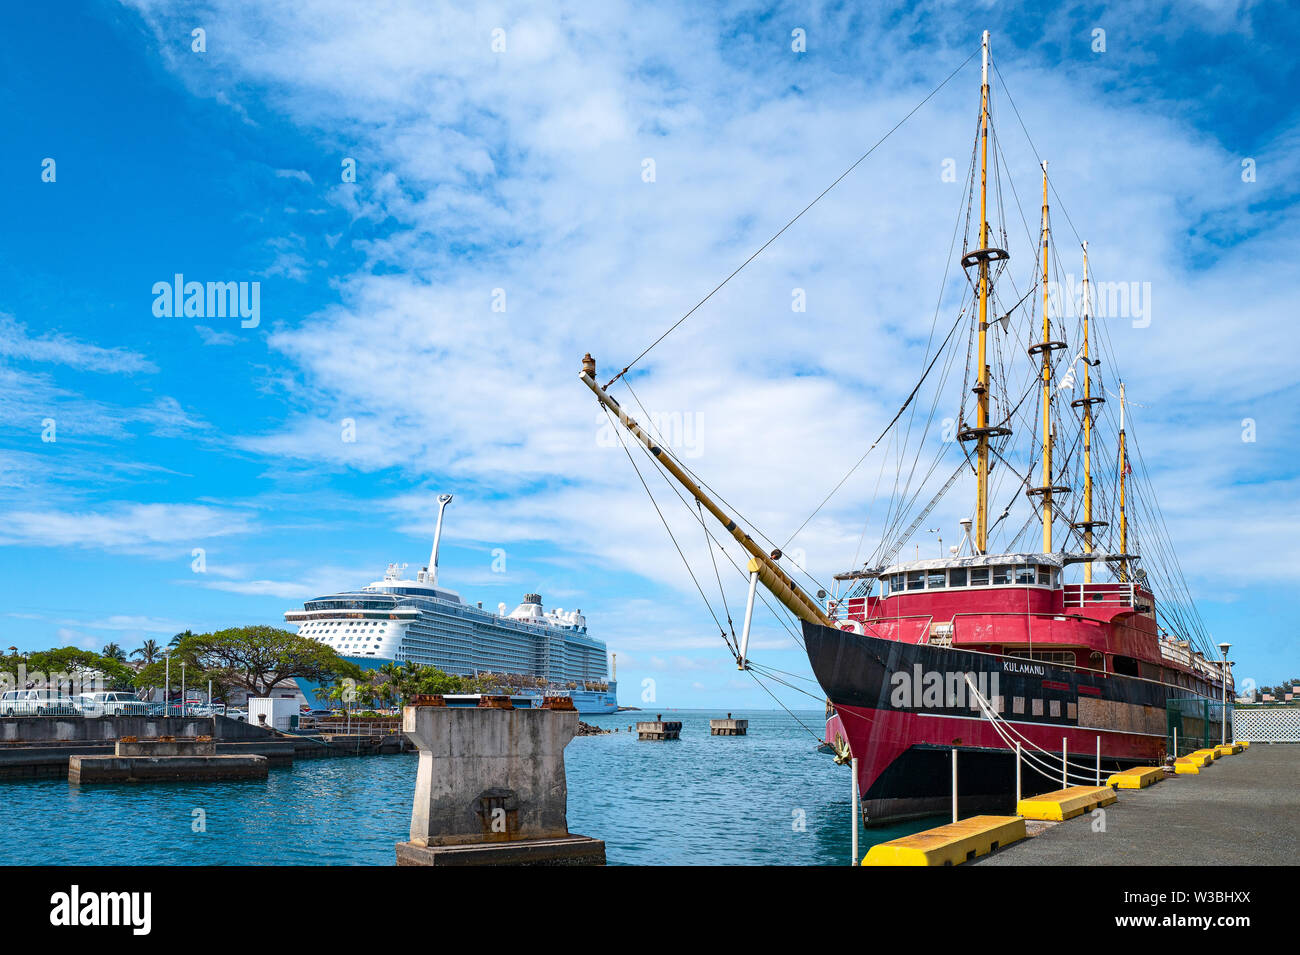 Honolulu, Awaii - May 3, 2019: An ancient sail boat with a cruise ship in the background in the Honolulu harbor Stock Photo